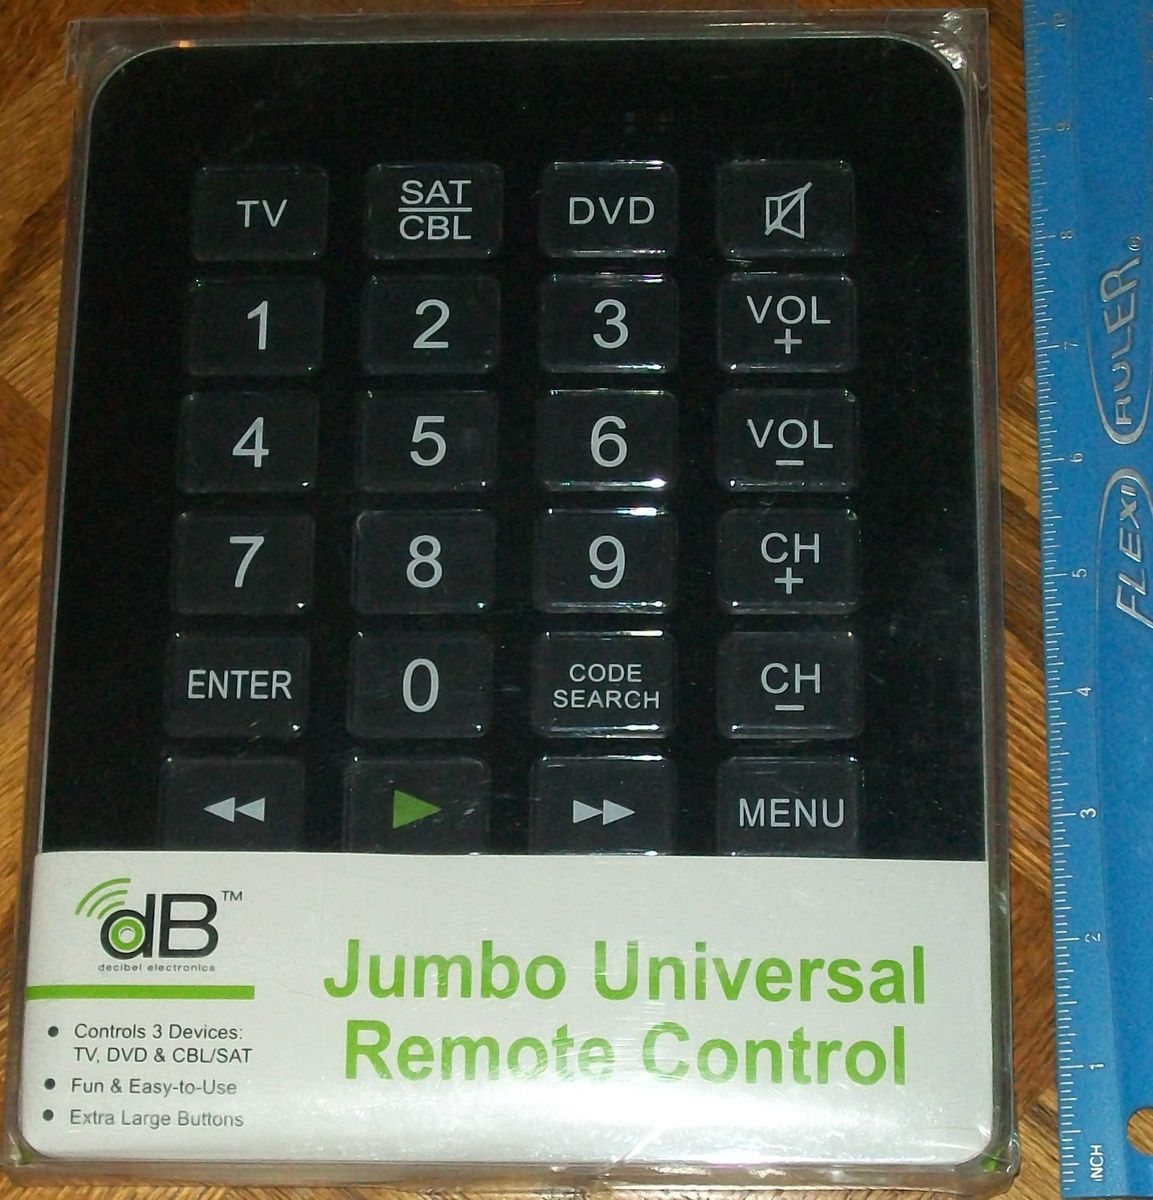 New Jumbo Universal Remote Control Easy to Use XL Buttons Fun